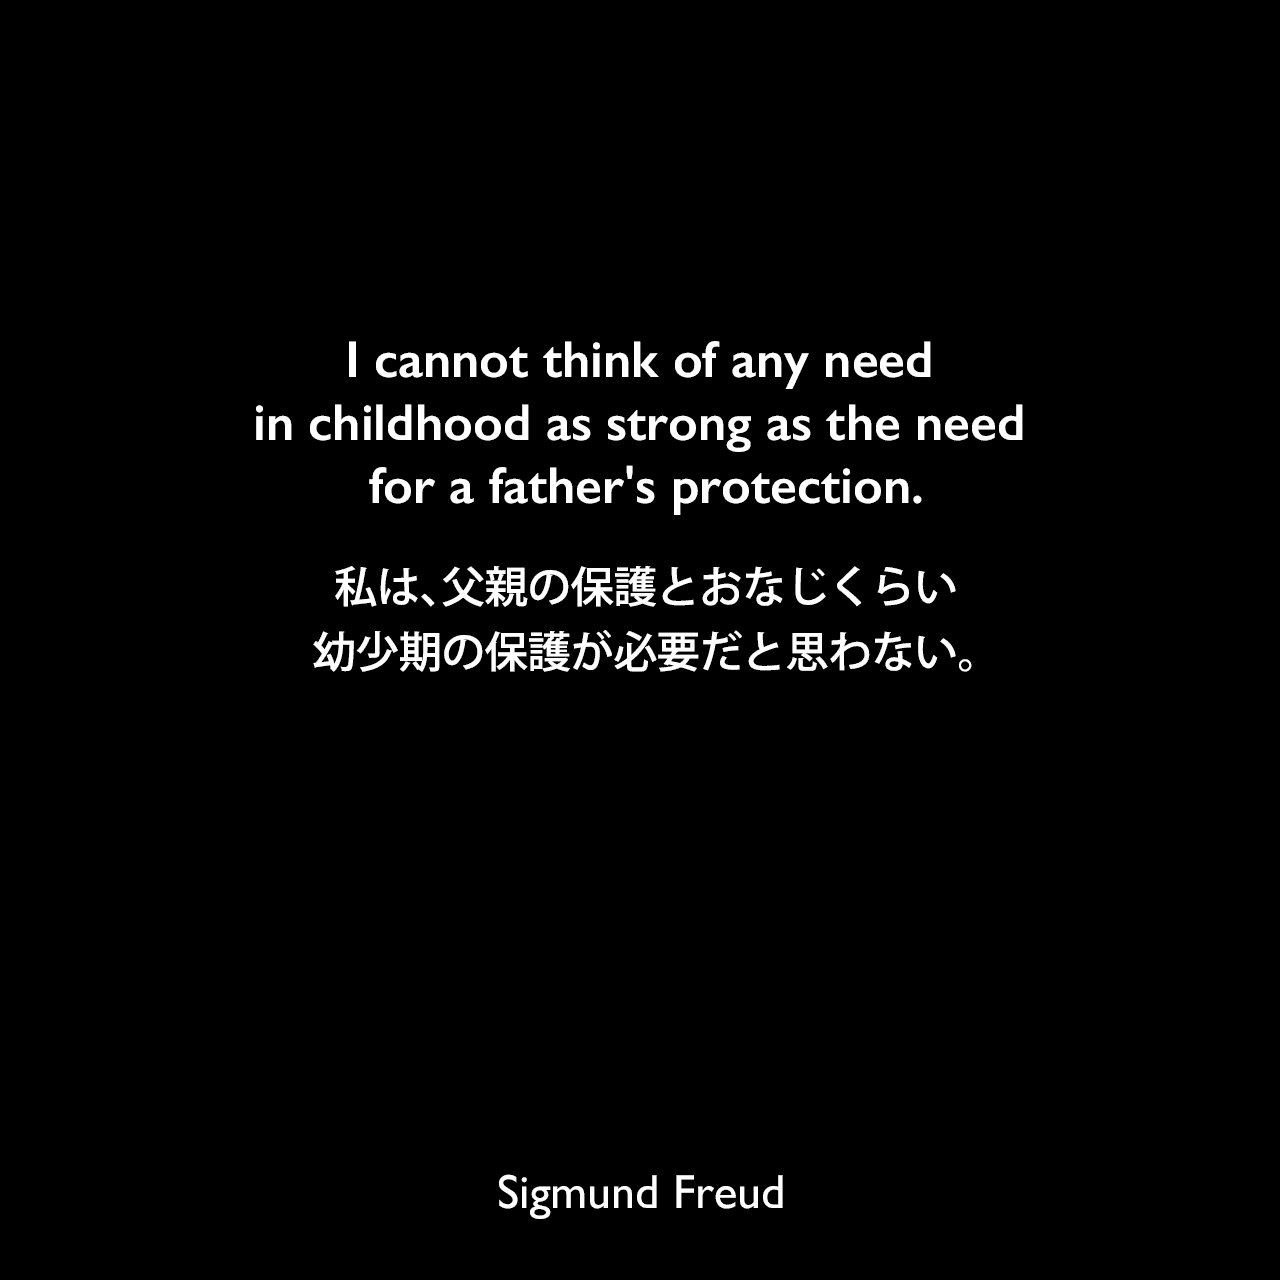 I cannot think of any need in childhood as strong as the need for a father's protection.私は、父親の保護とおなじくらい幼少期の保護が必要だと思わない。Sigmund Freud